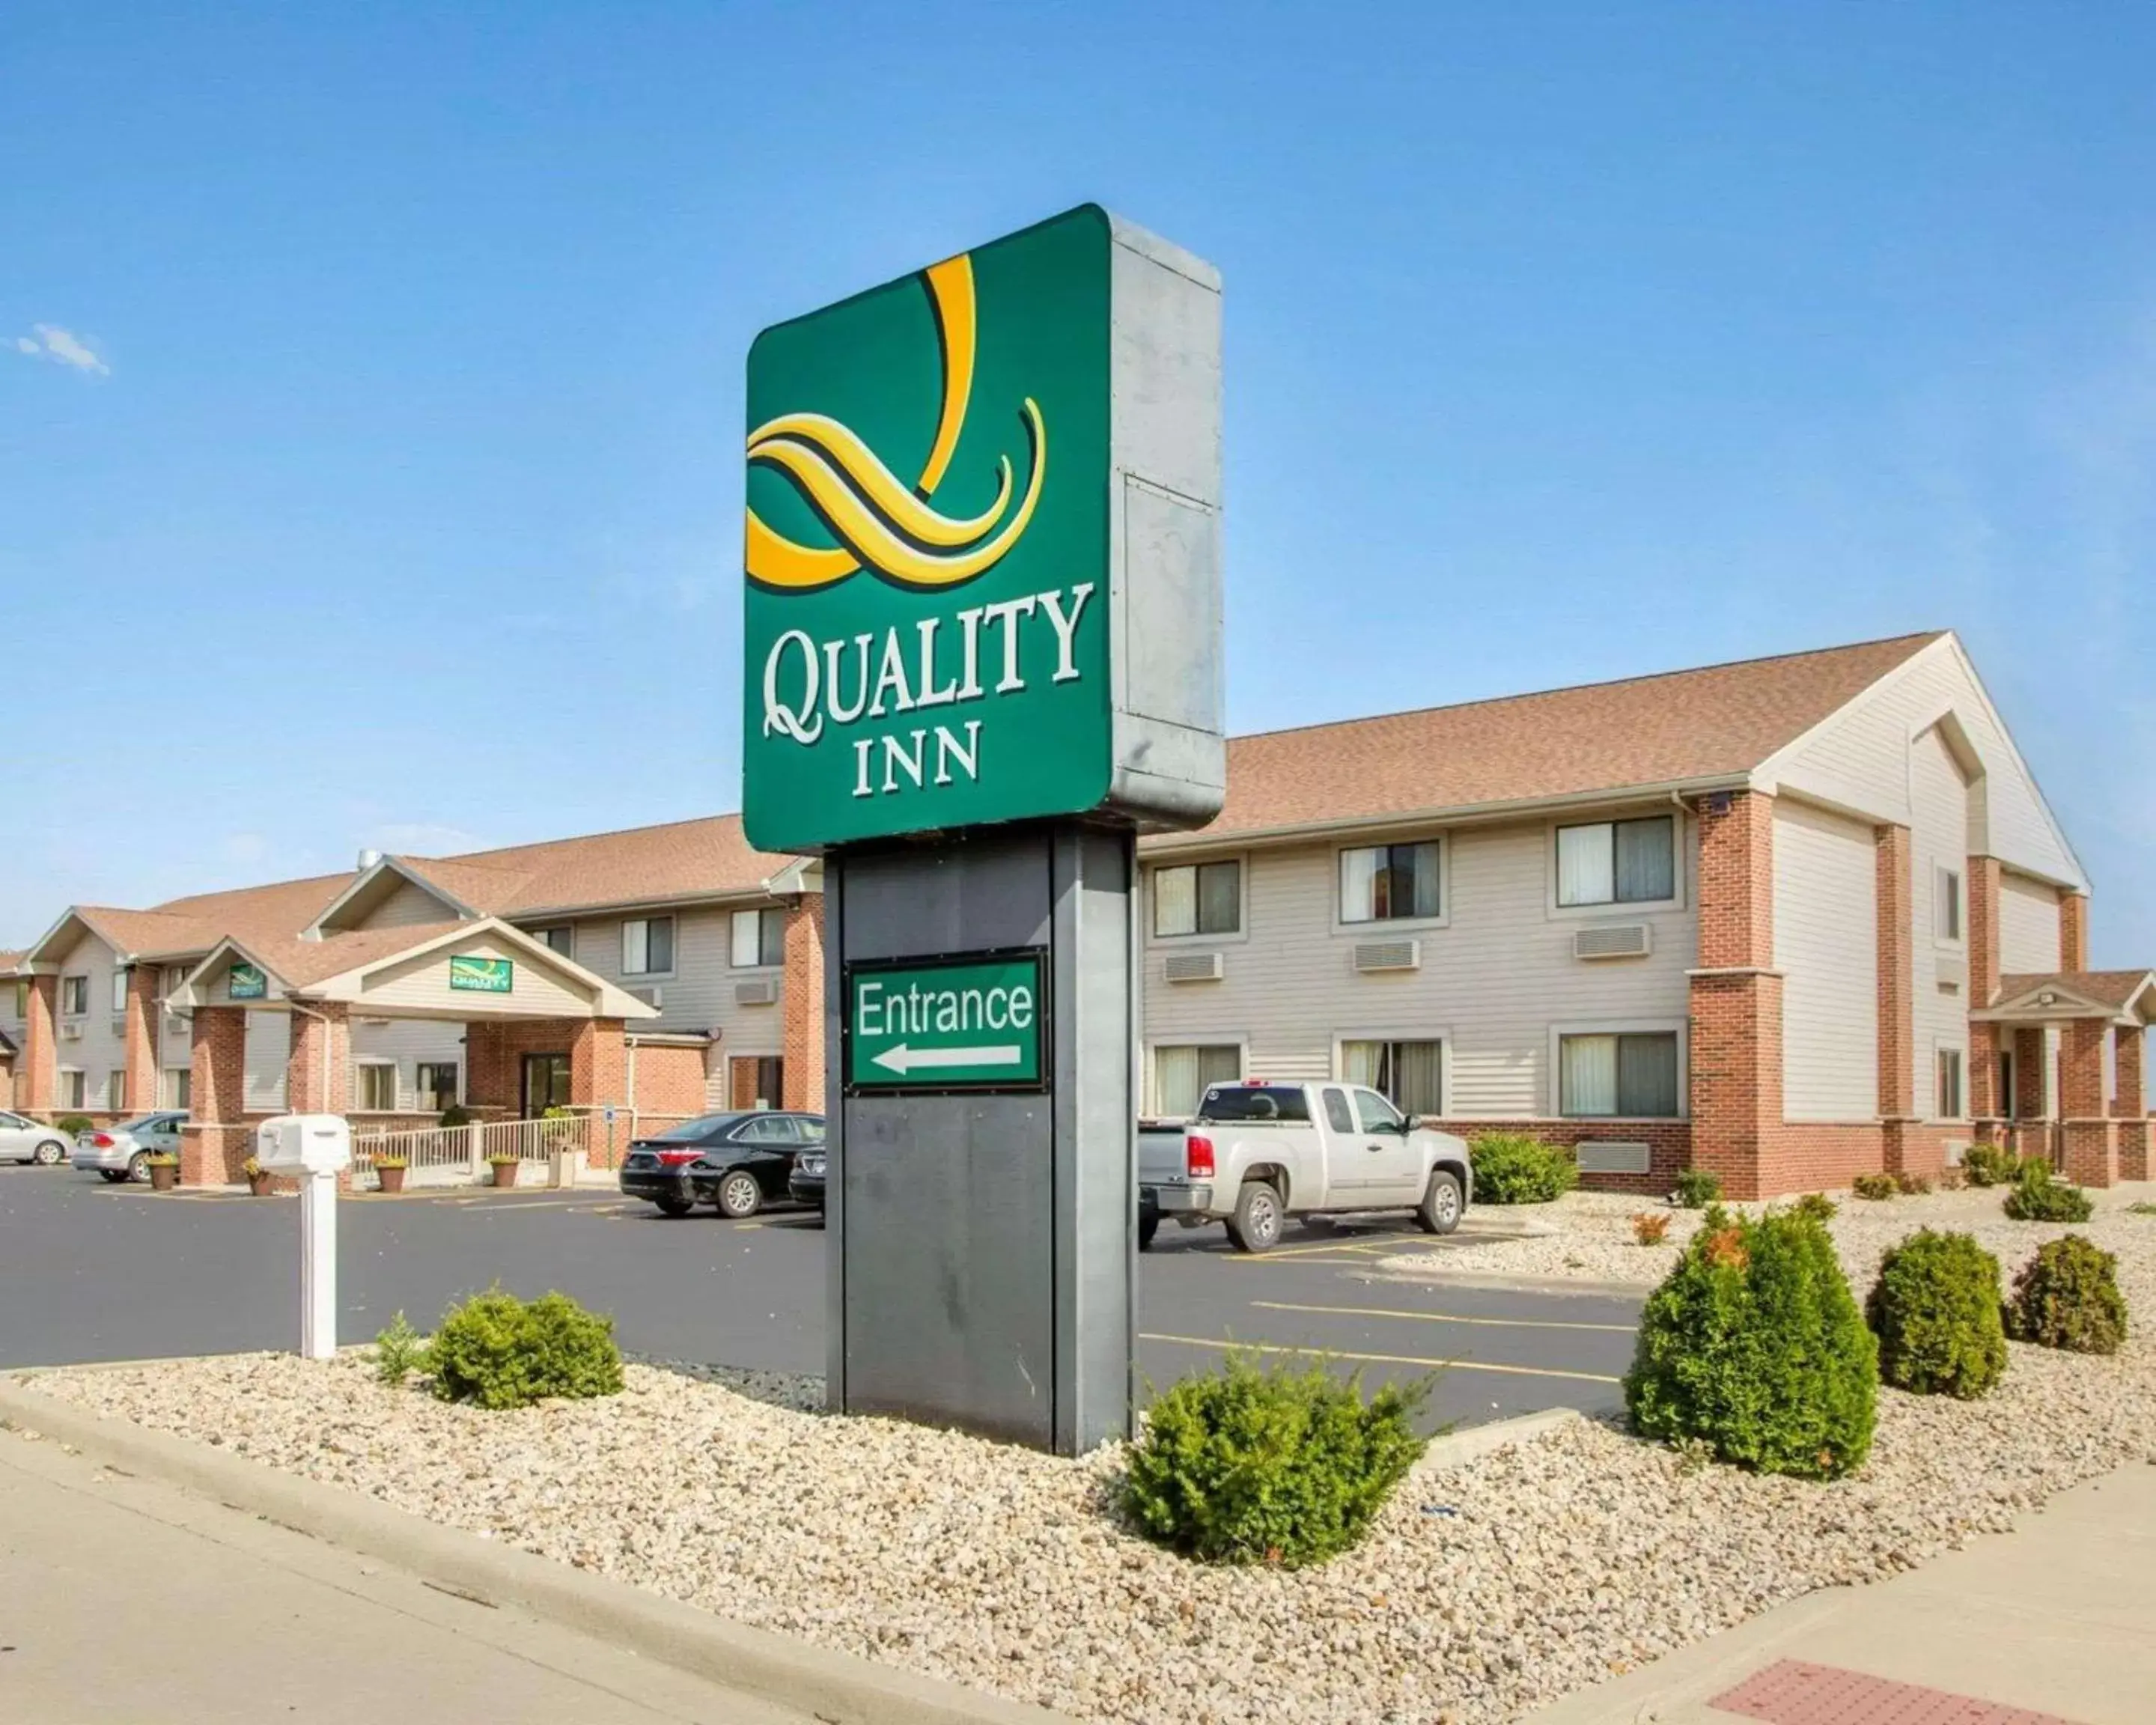 Property building in Quality Inn Ottawa near Starved Rock State Park